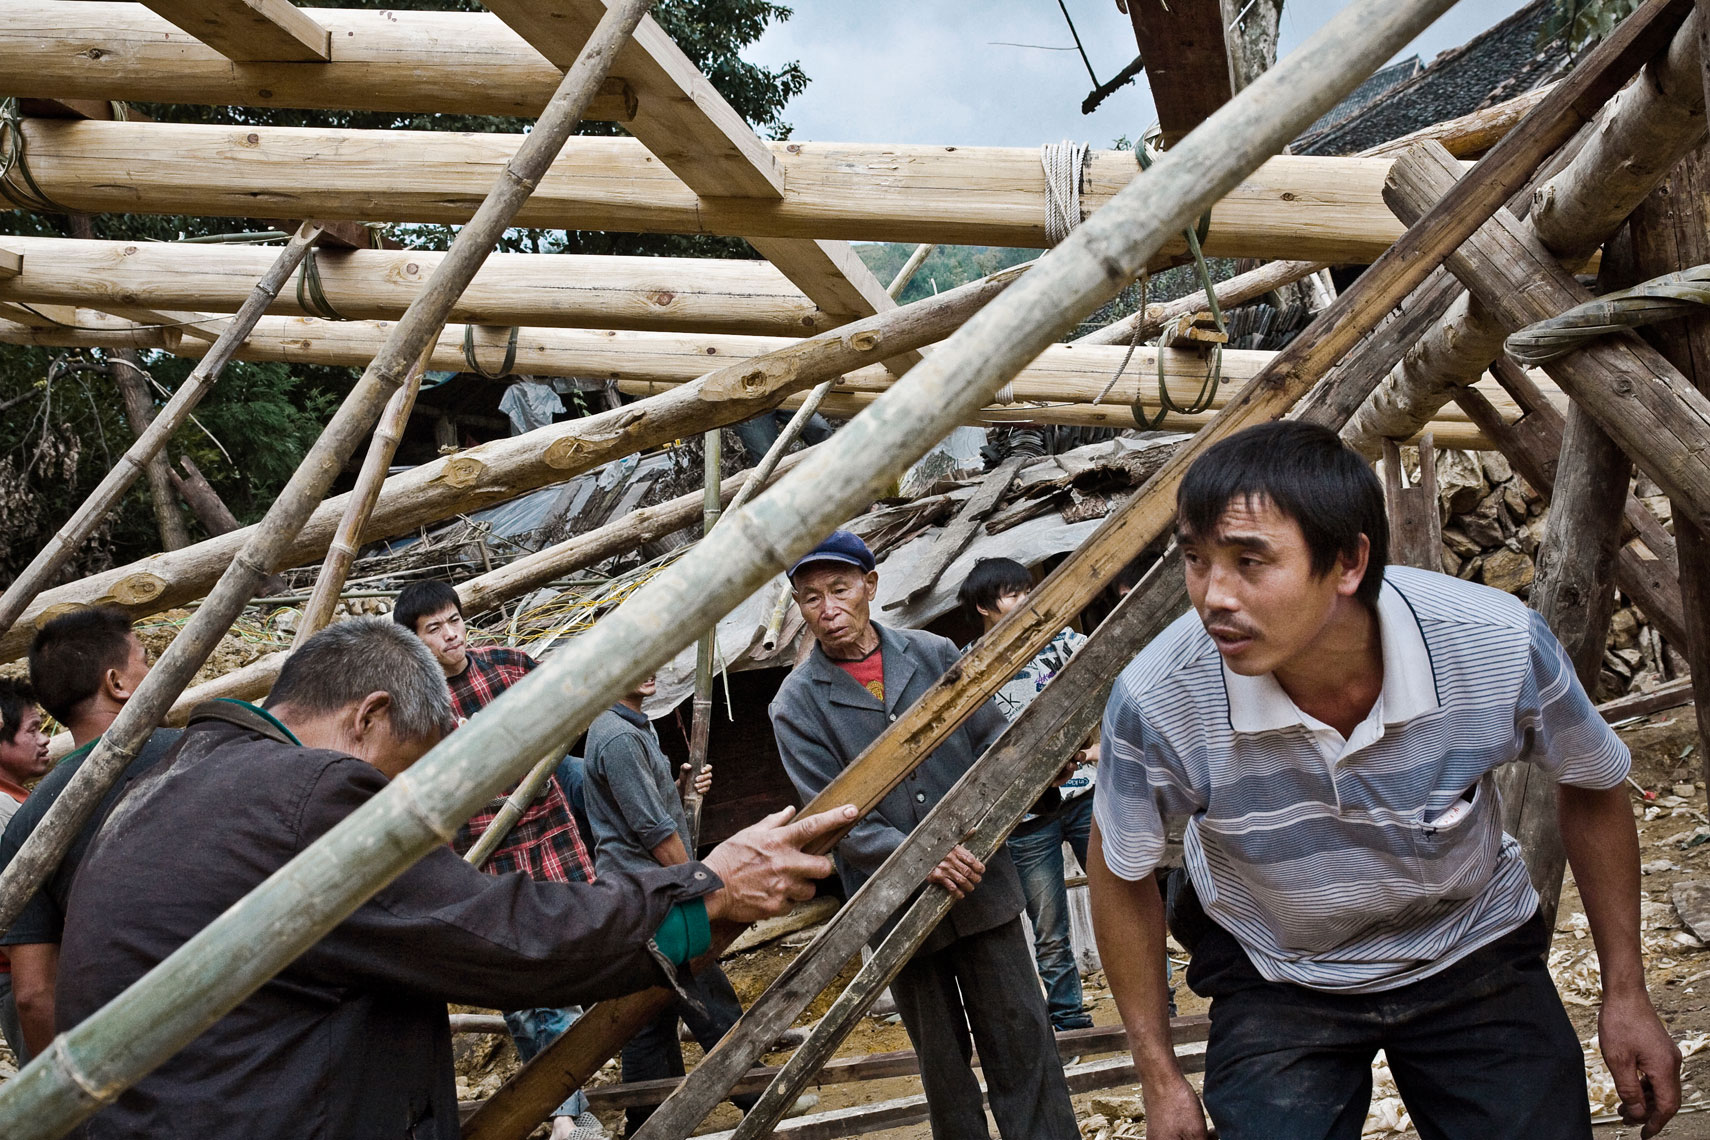 CHINA. Guangxi Province, September 2012. Zhongliu village. Men of the village during the construction of a traditional wood house.